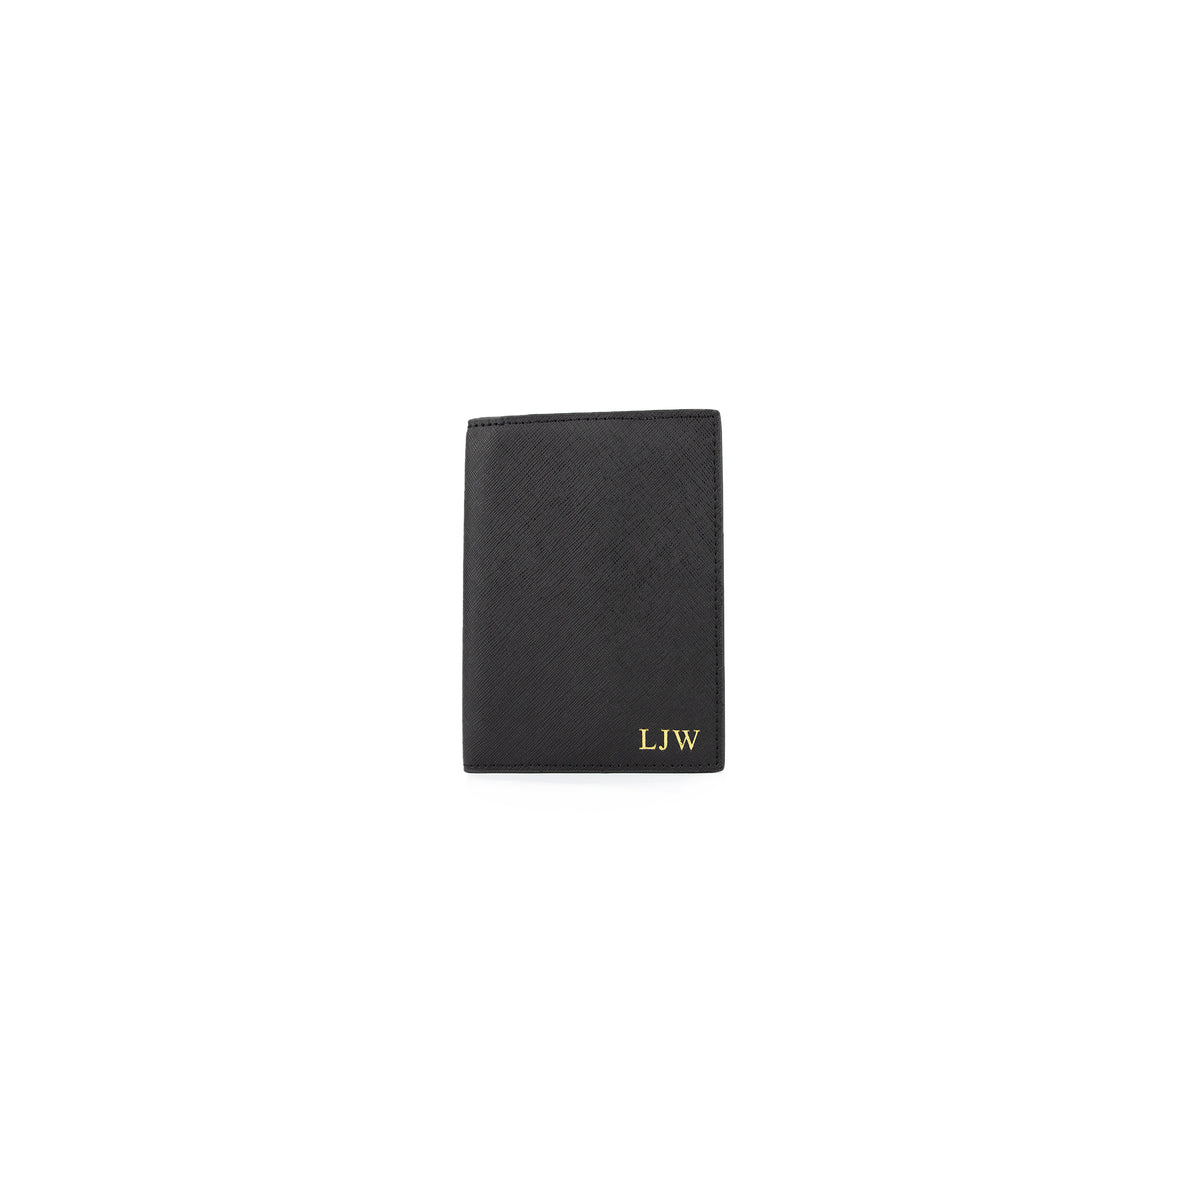 Personalised Black Monogrammed Saffiano Leather Passport Cover